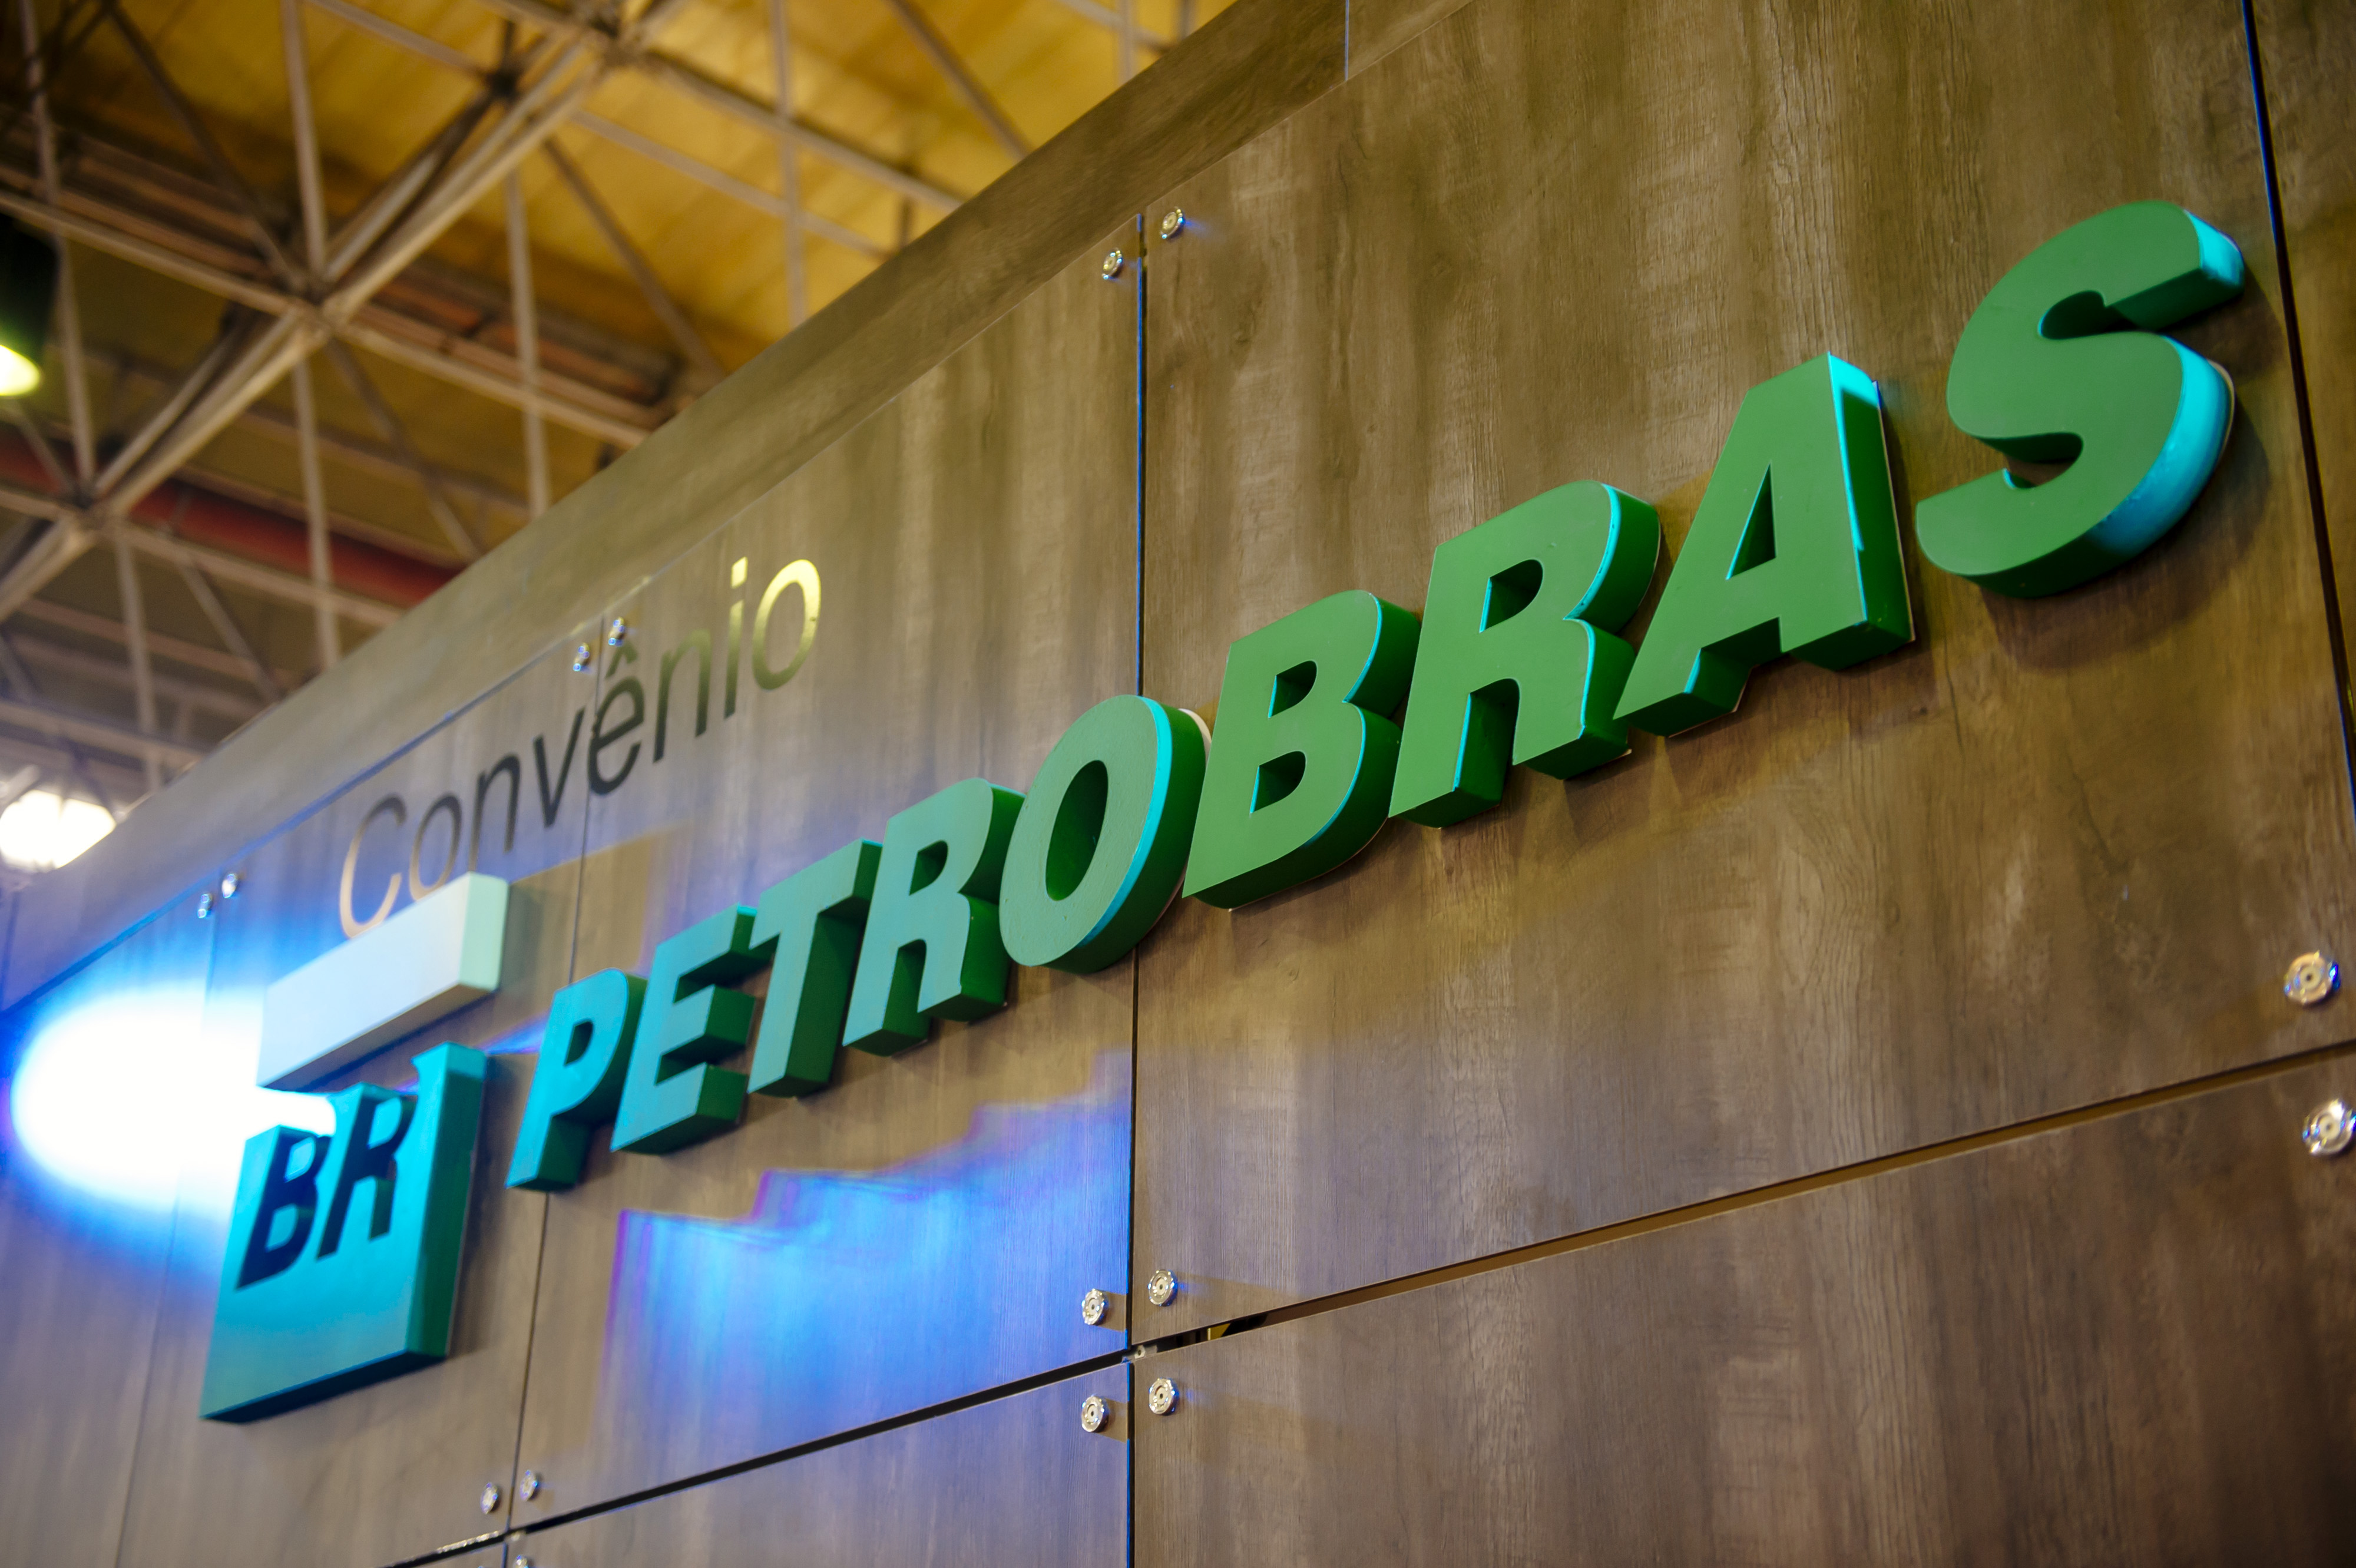 A Petrobras logo sits on display at the Petroleo Brasileiro SA trade stand during the Rio Oil &amp; Gas 2014 Expo and Conference in Rio de Janeiro, Brazil, on Sept. 15, 2014. (Bloomberg—Getty Images)